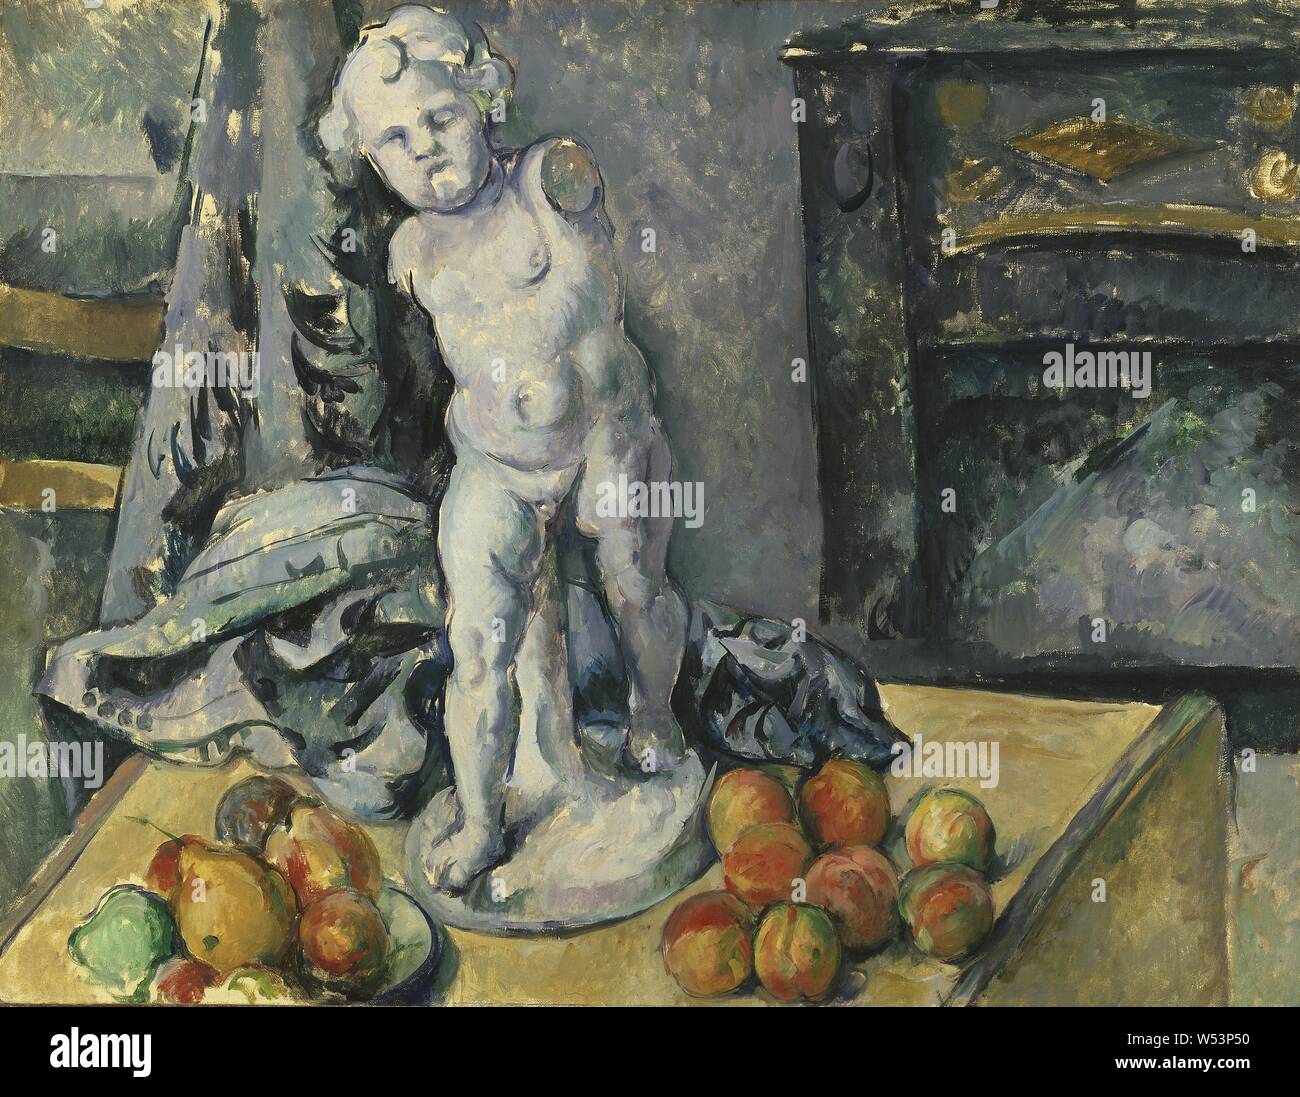 Paul Cézanne, Still Life with Plaster Cupid English, Still Life with Statuette, Still Life with figurine, painting, still life, 1890s, Oil on canvas, Glazed, Height, 63 cm (24.8 inches), Width, 81 cm (31.8 inches) Stock Photo